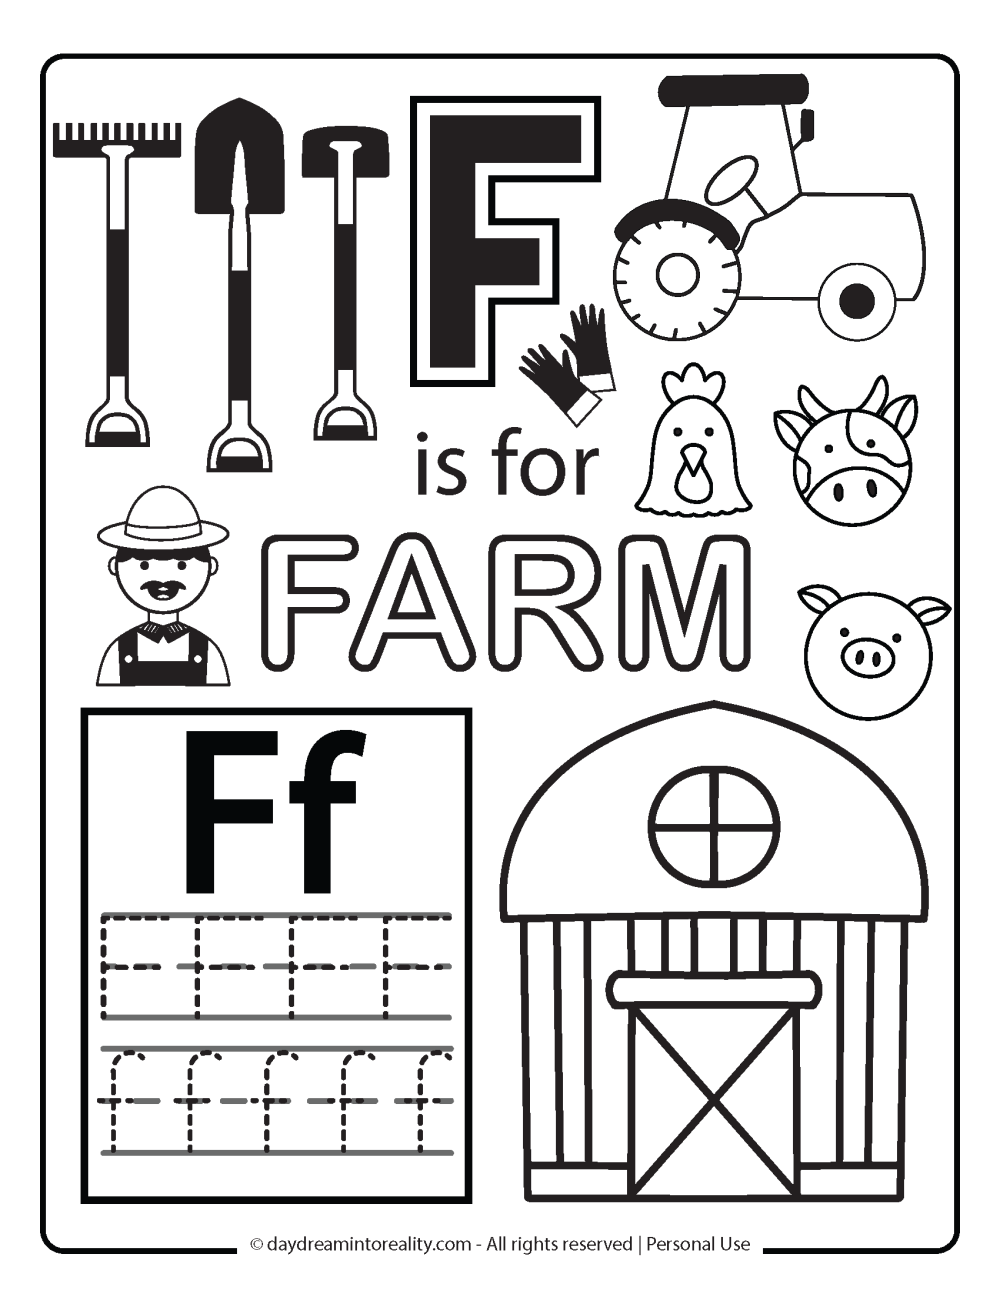 F is for farm coloring page Free Printable